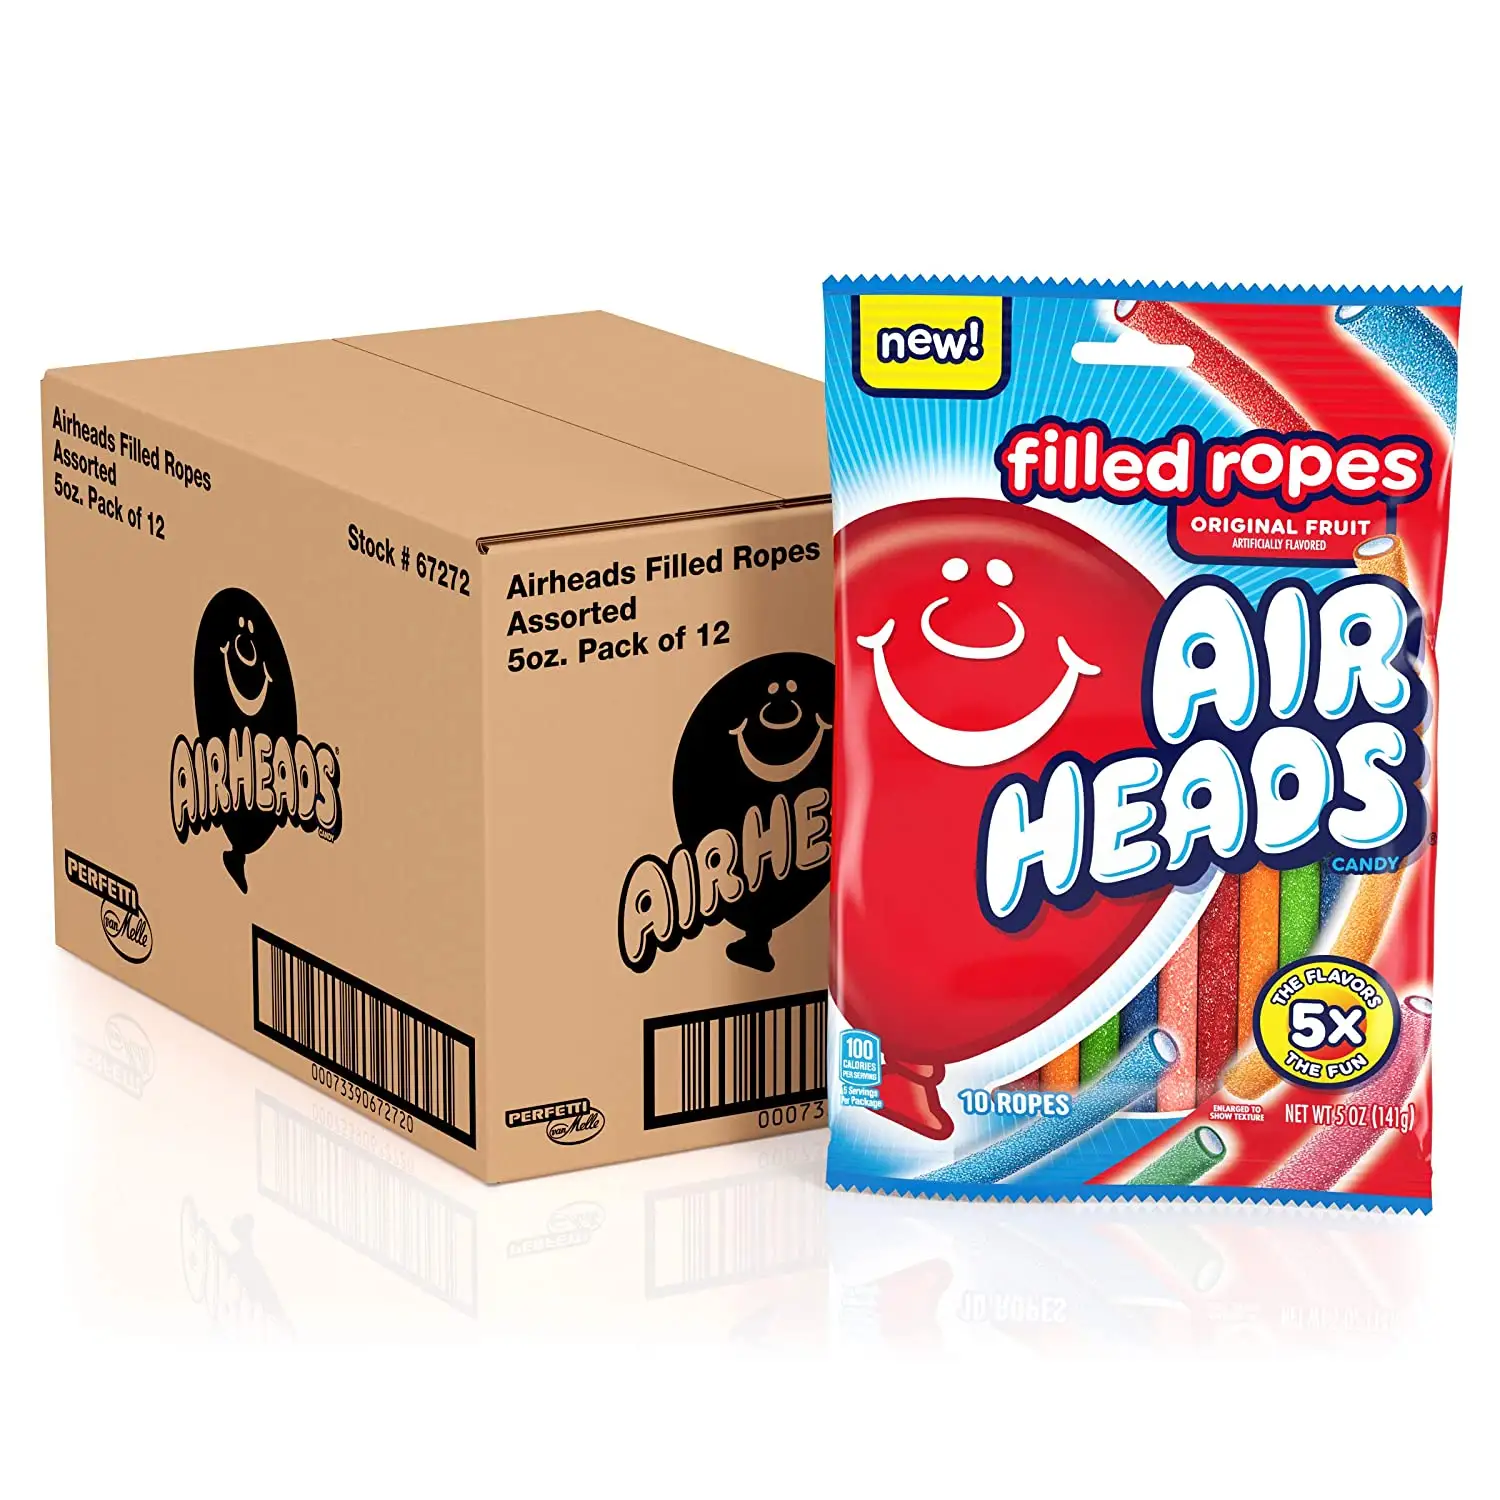 Airheads Filled Ropes Candy Fruit 5 Oz [12-Bags]